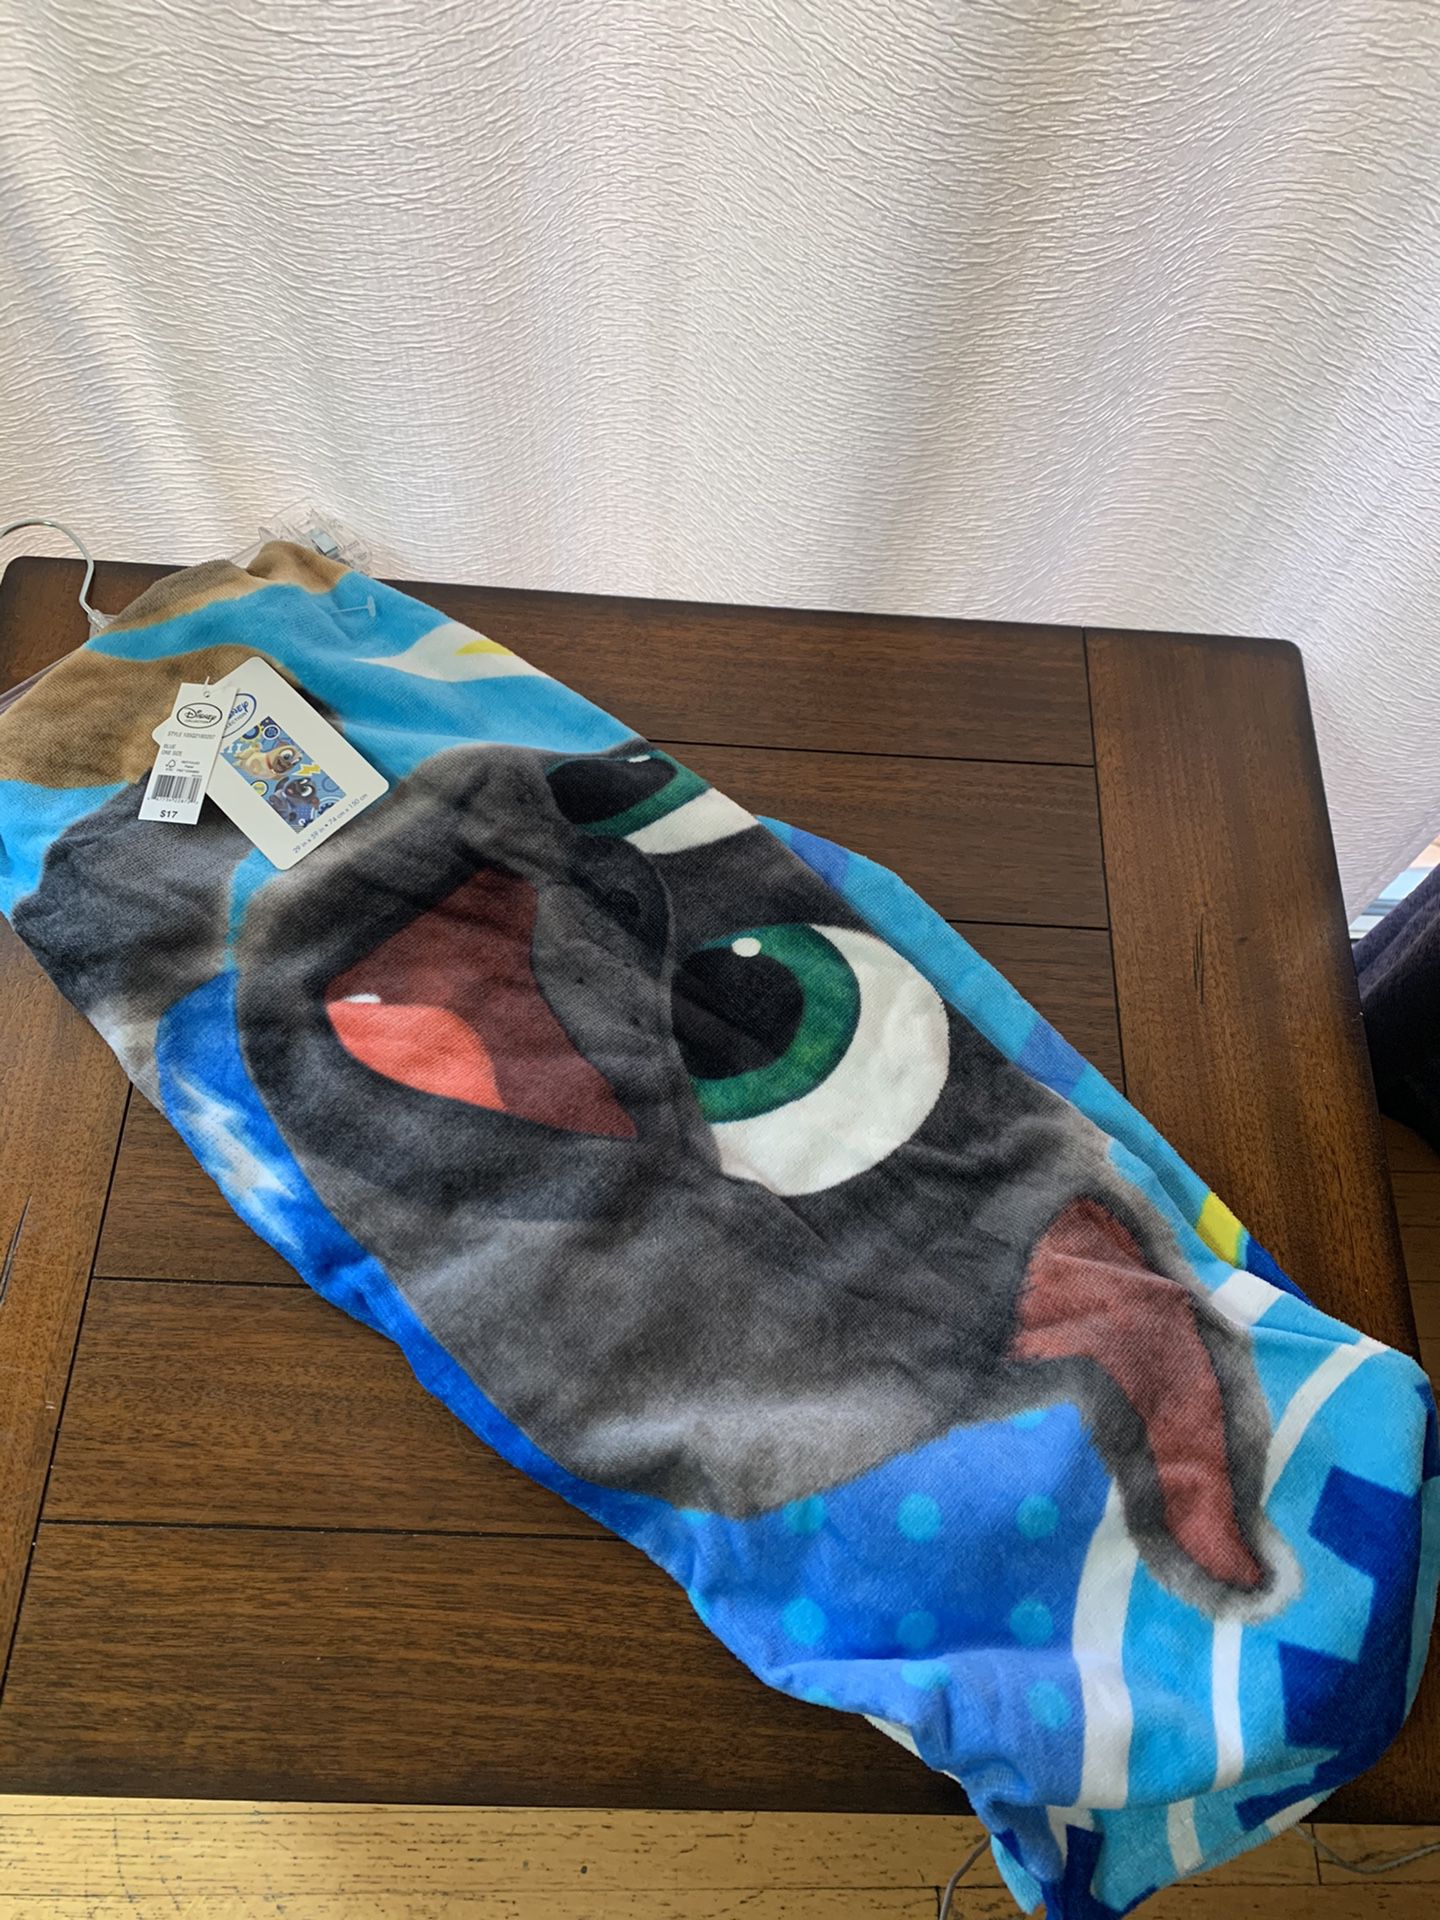 New puppy dog pals towel from the Disney store